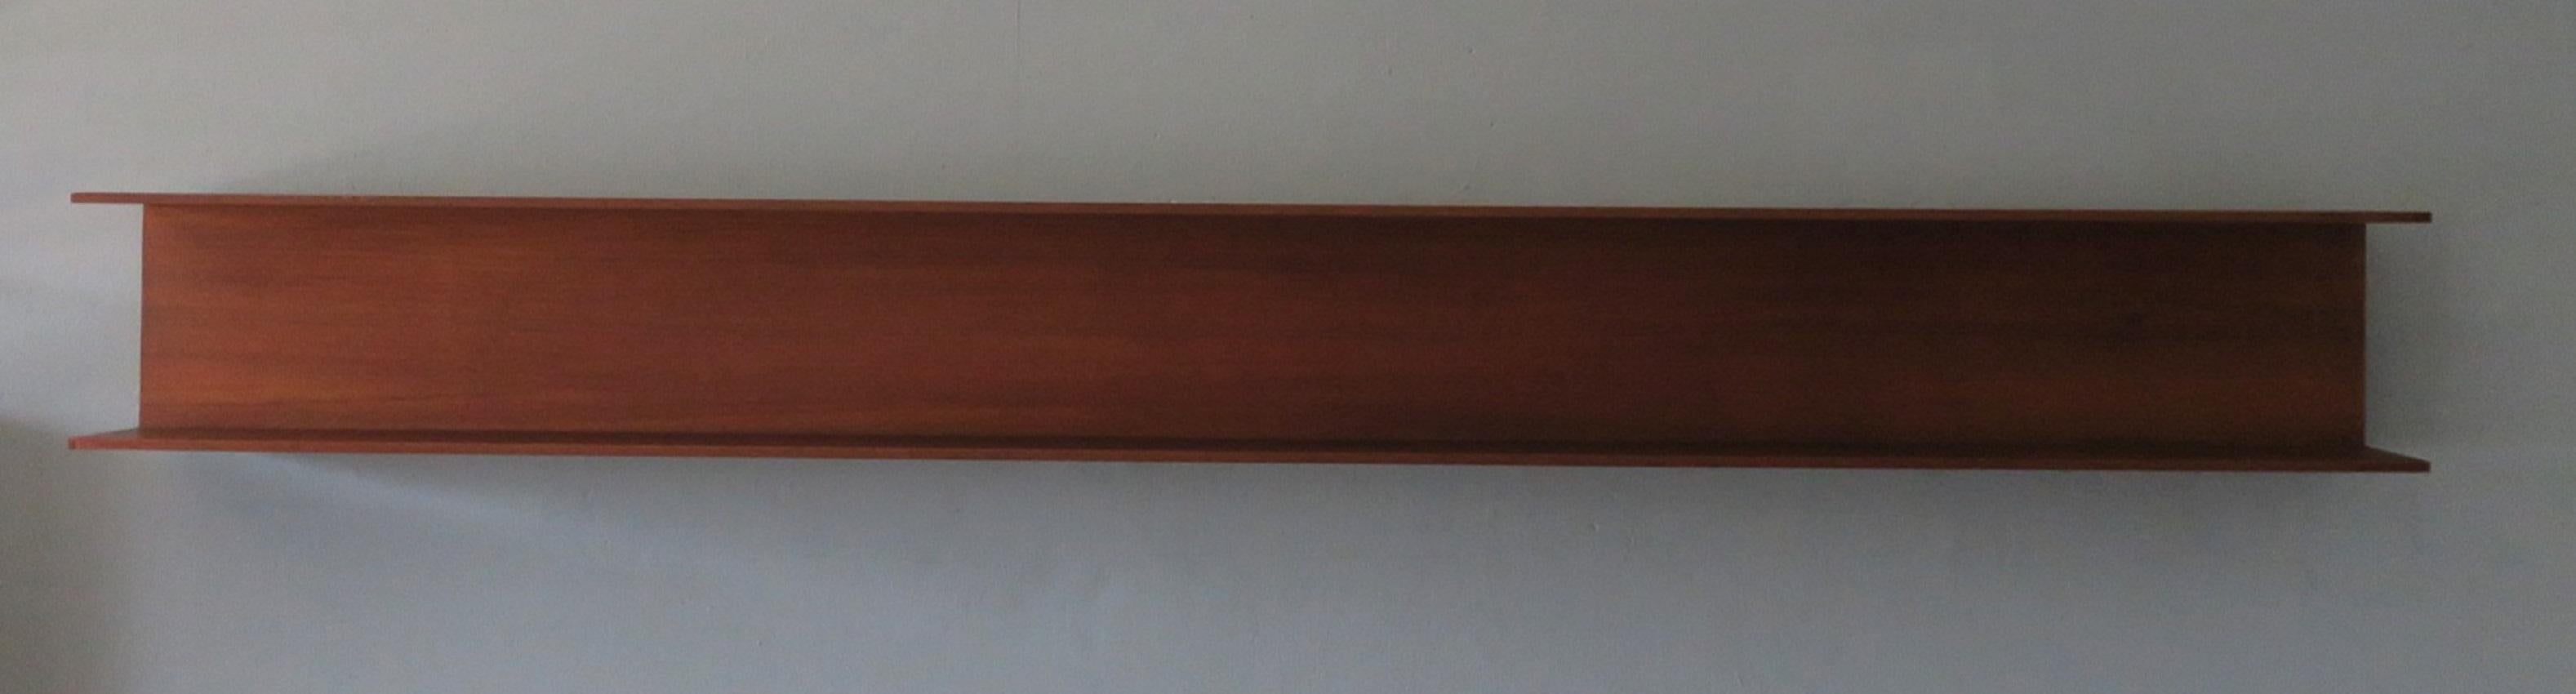 Extra long (240 cm) Walter Wirz for Wilhelm Renz floating teak shelf from the 1960s, with maker's label, in very good vintage condition with minimal signs of age and use.